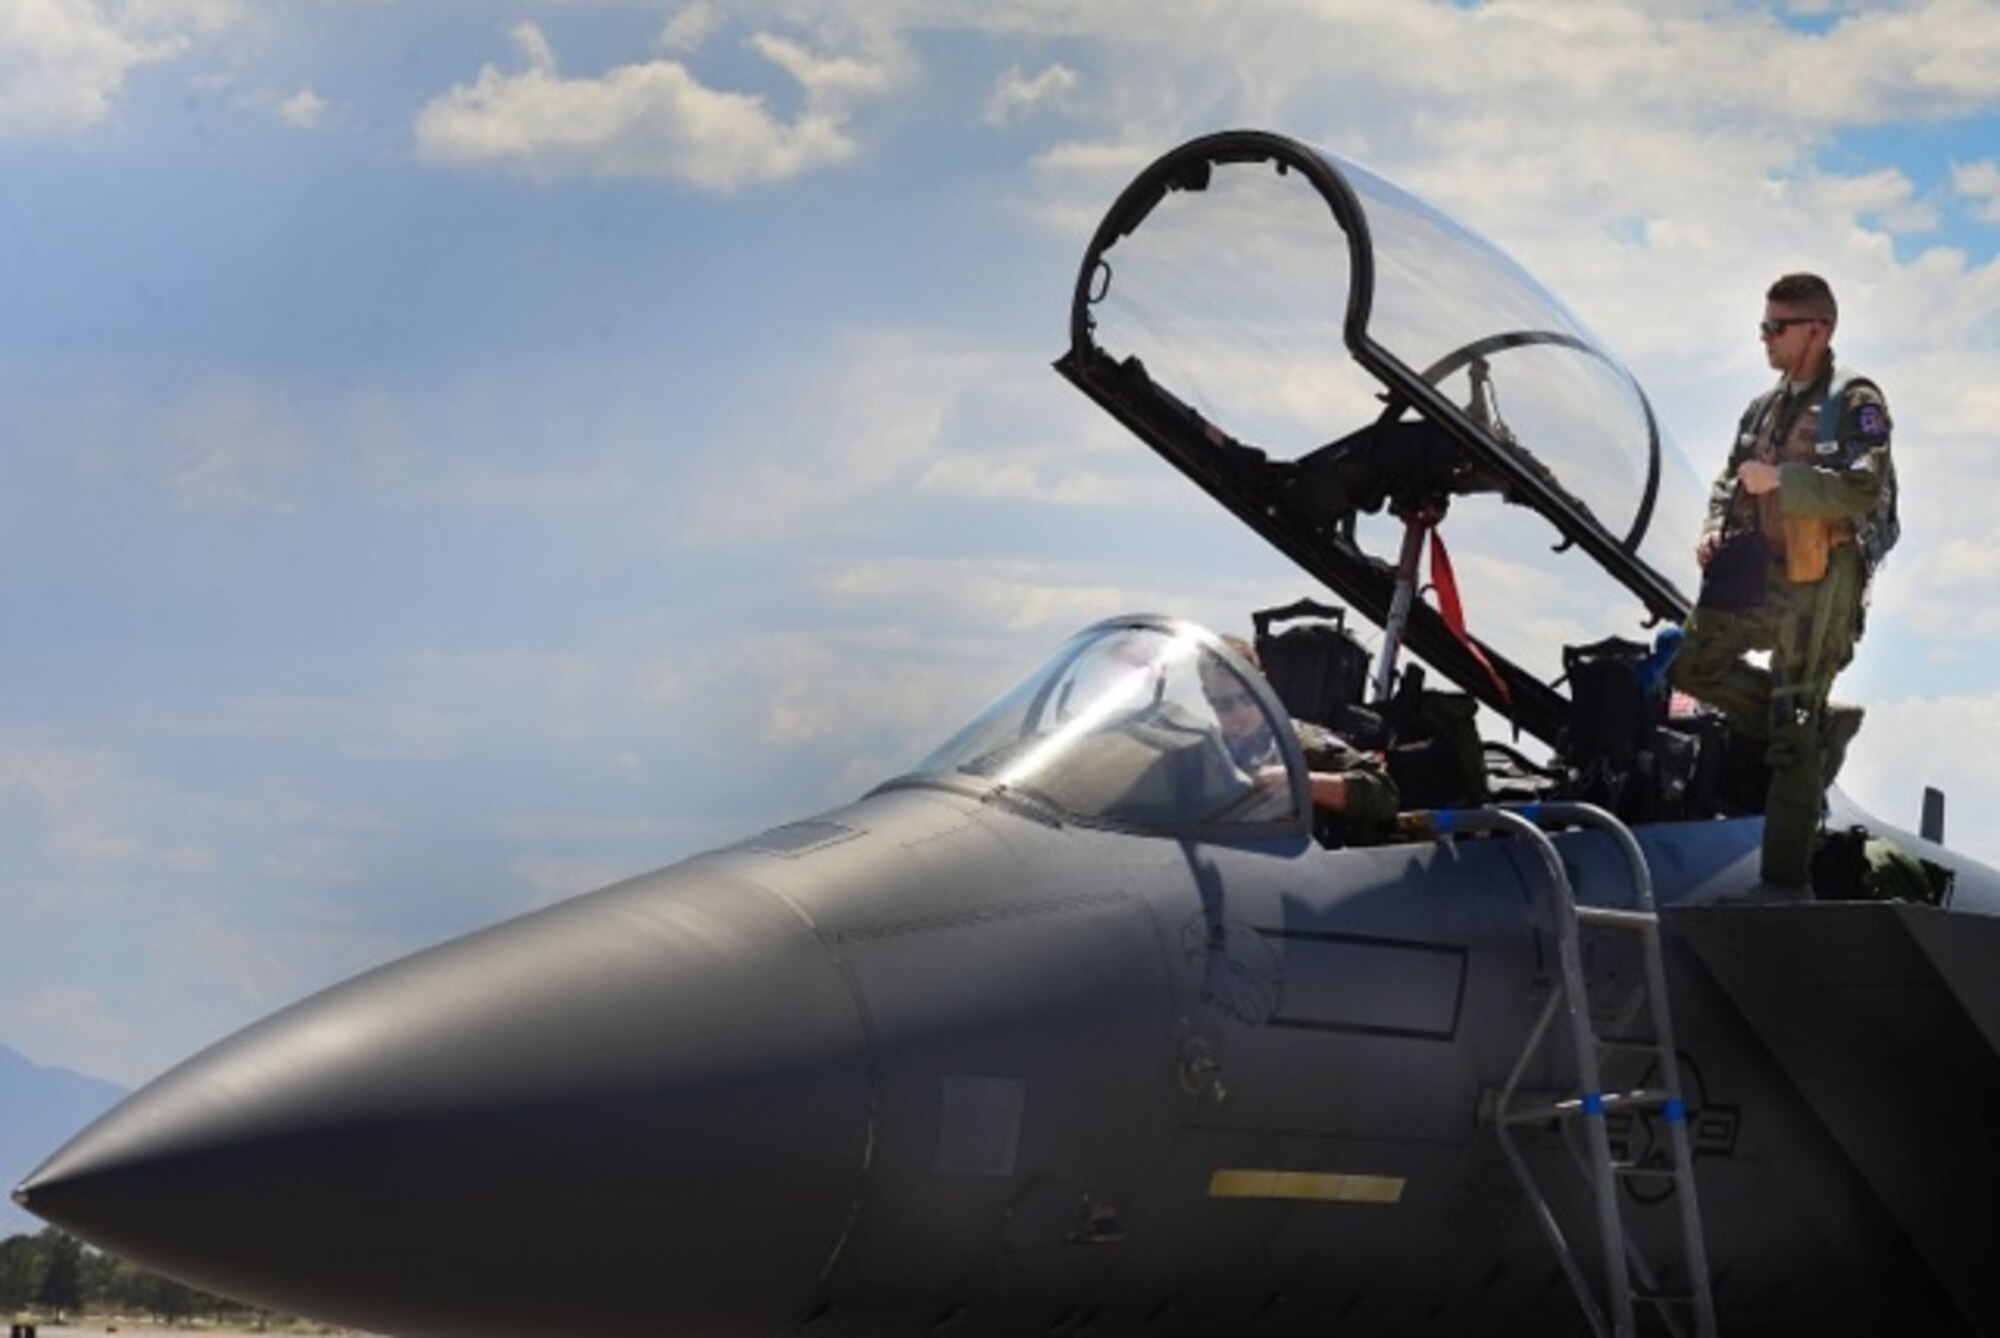 U.S. Air Force 1st Lieutenant Drew Lyons, 492nd Fighter Squadron, F-15E Strike Eagle pilot, and 1st Lieutenant J. Paul Reasner, 492nd FS, F-15E Strike Eagle weapon systems officer, make final observations of their aircraft prior to a sortie in support of exercise Red Flag 16-4 at Nellis Air Force Base, Nevada Aug 17. Red Flag is the U.S. Air Force’s premier air-to-air combat training exercise and one of a series of advanced training programs that is administered by the U.S. Air Force Warfare Center and executed through the 414th Combat Training Squadron. (U.S. Air Force photo/ Tech. Sgt. Matthew Plew)